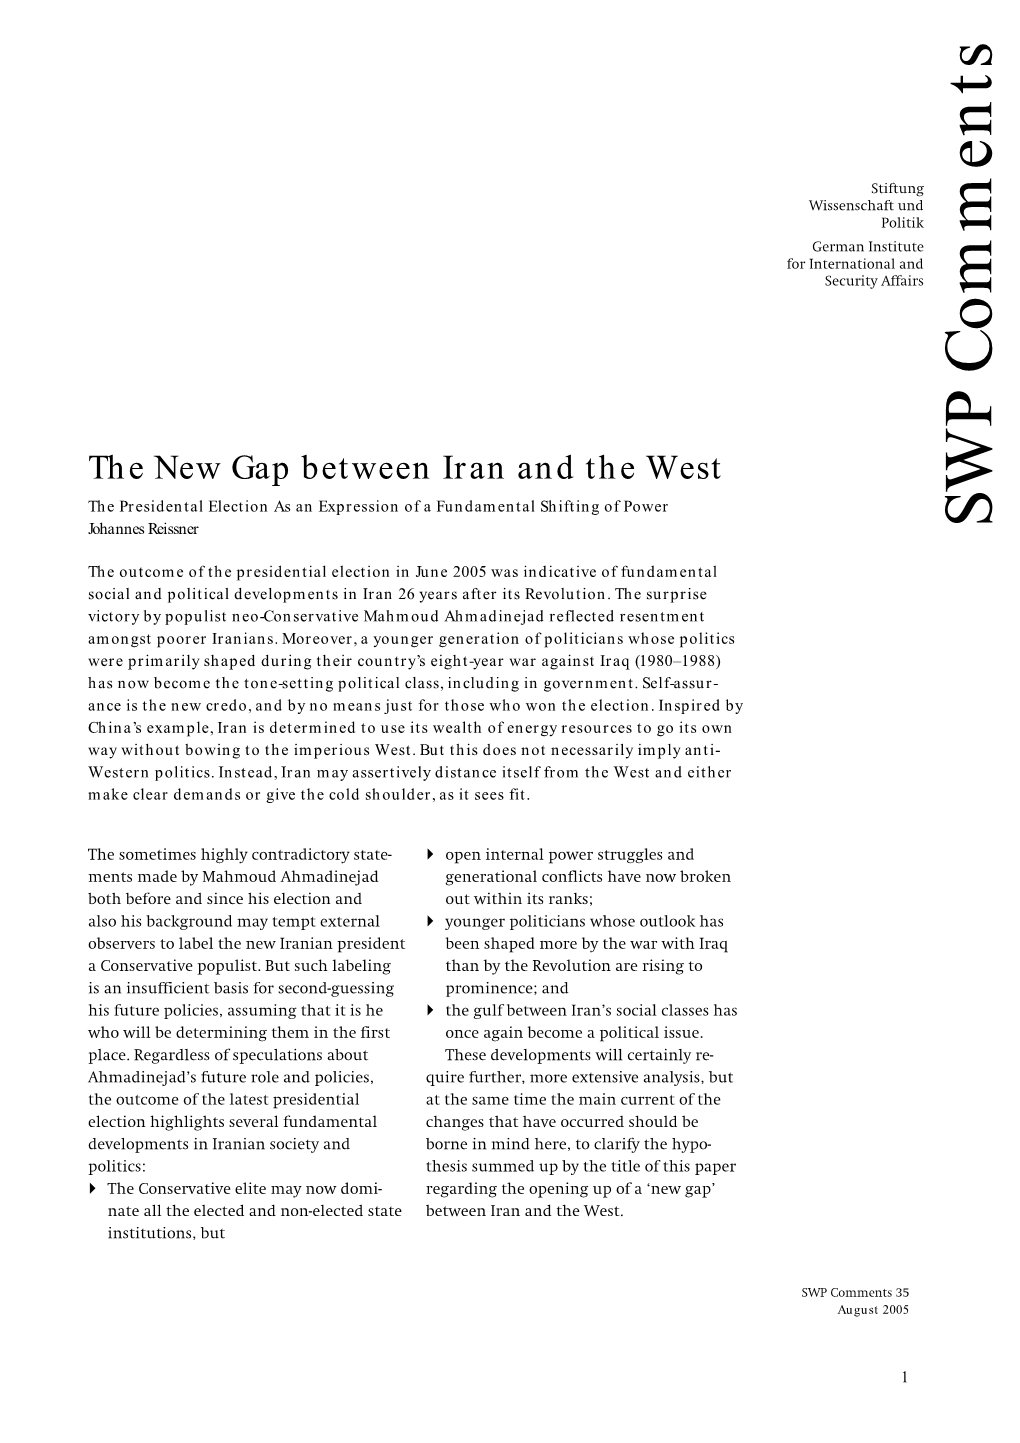 The New Gap Between Iran and the West the Presidental Election As an Expression of a Fundamental Shifting of Power